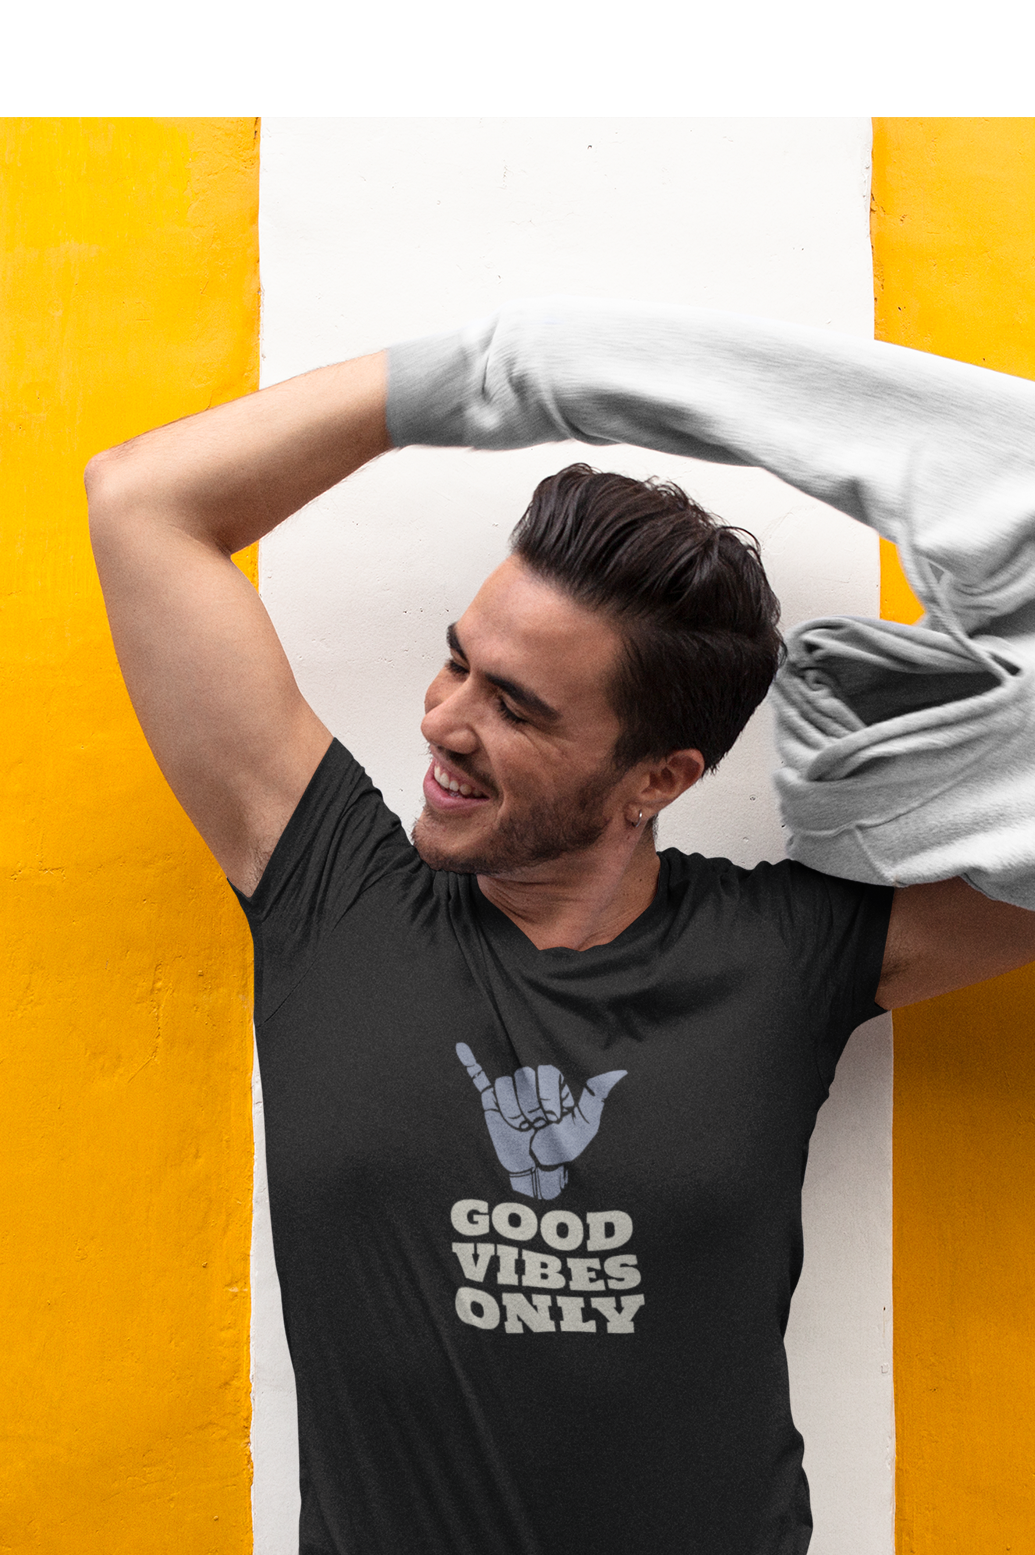 GOOD VIBES ONLY HALF-SLEEVE T-SHIRT